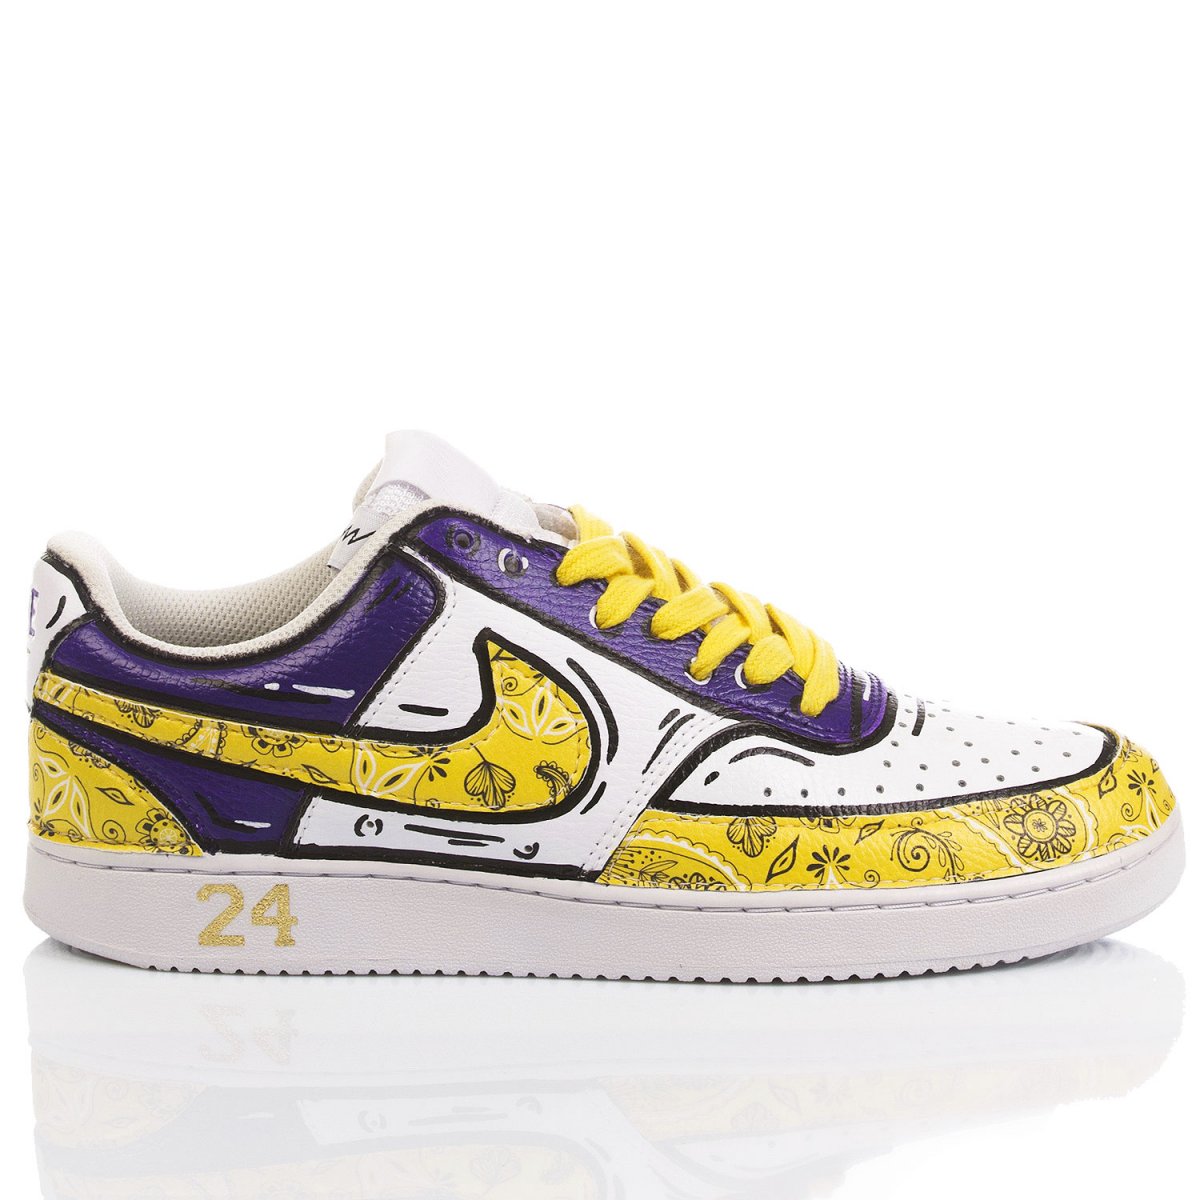 Nike Comics Los Angeles Air force vision Special